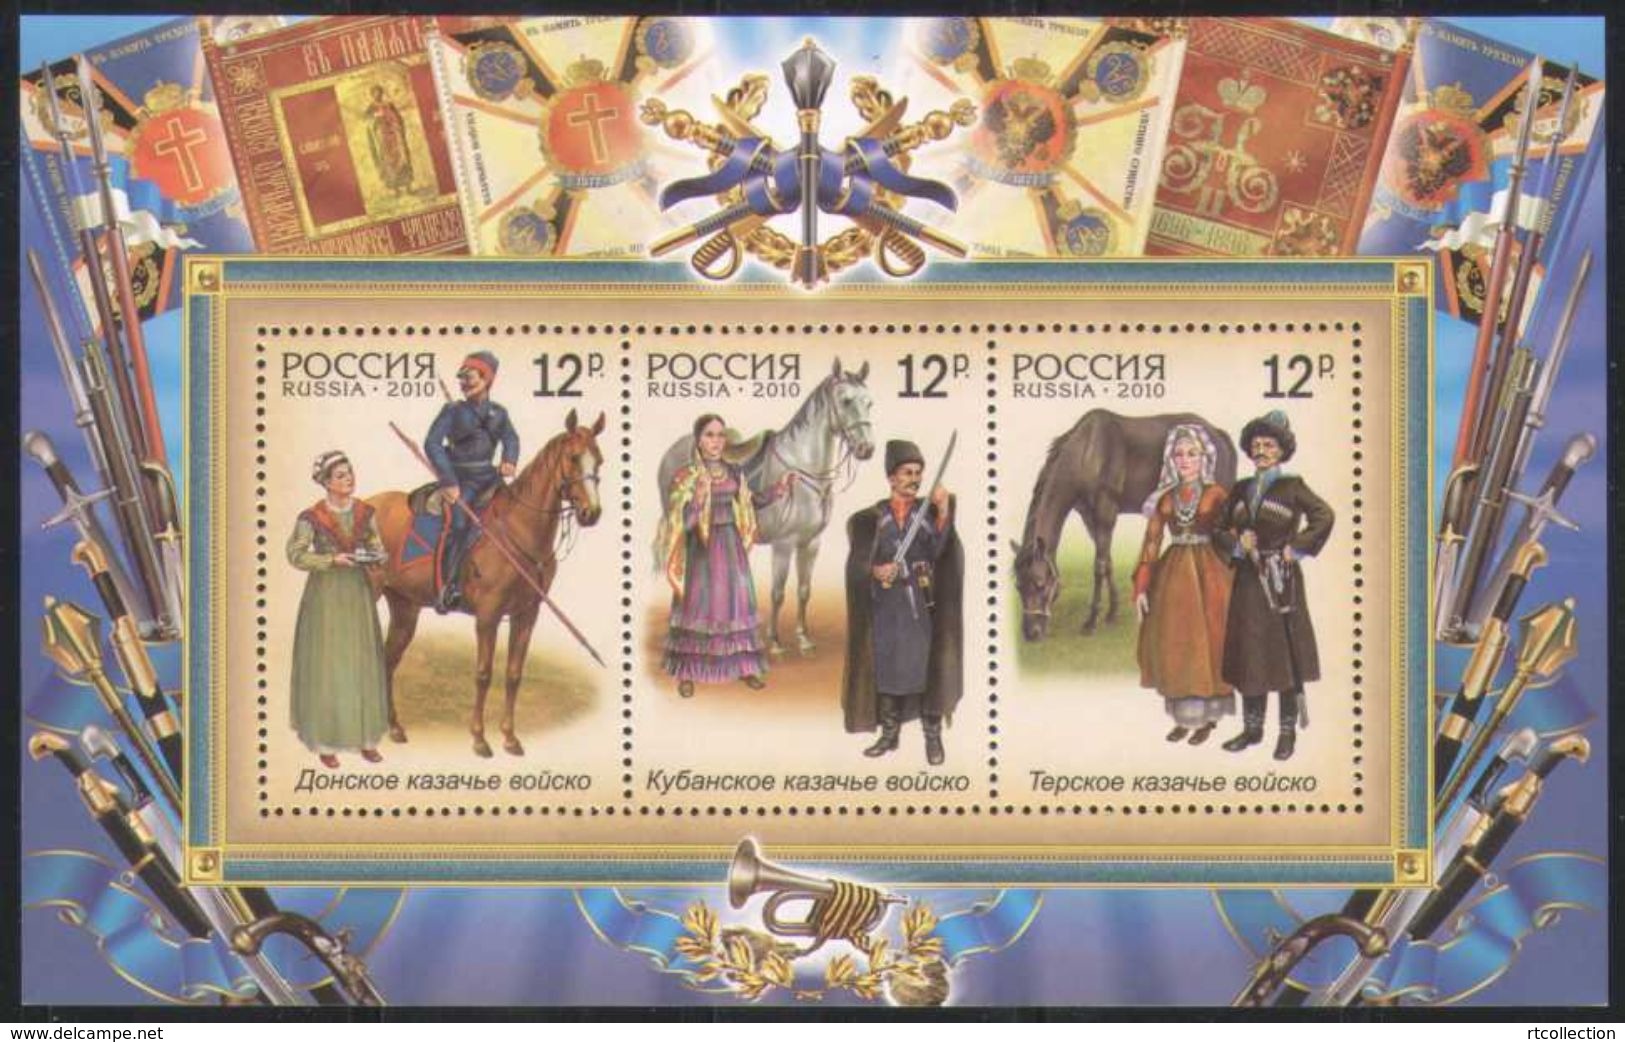 Russia 2010 History Cossacks Solider People Places Horses Cultures Costumes Military S/S Stamps MNH Mi BL138 Sc#7232 - Costumes